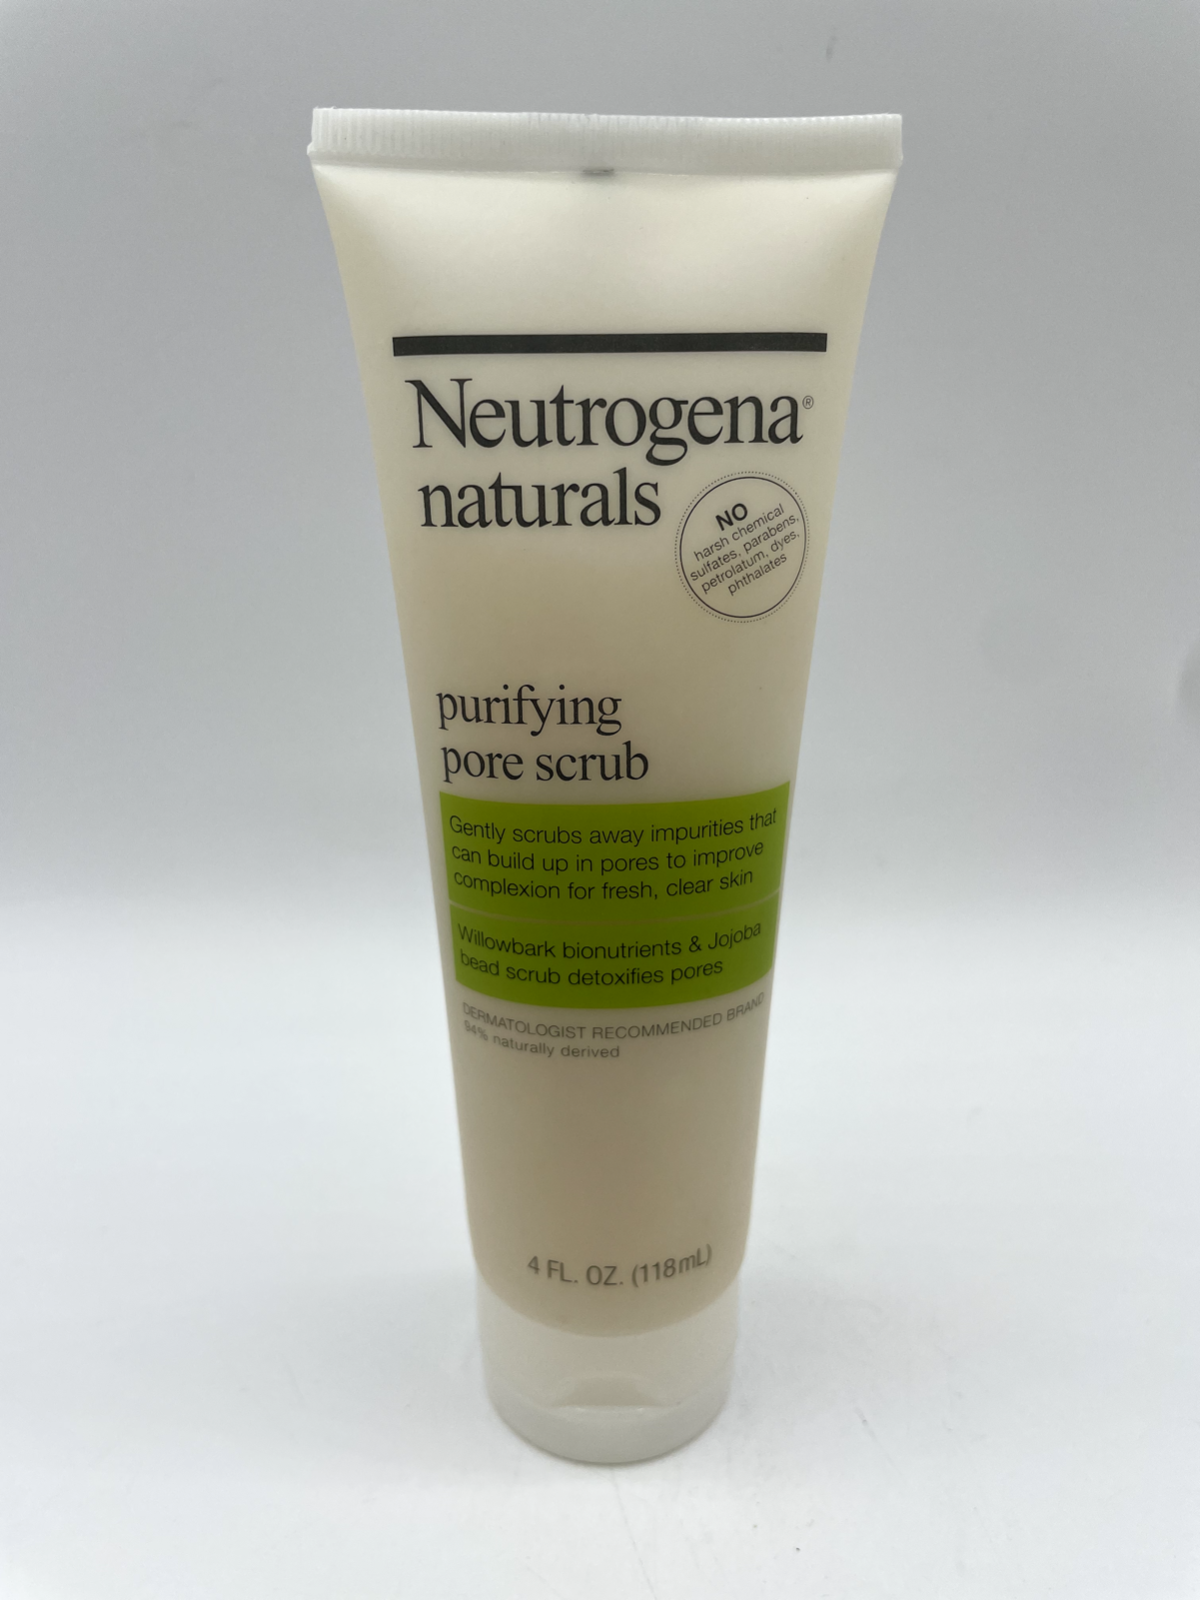 Neutrogena Naturals Purifying Pore Scrub Face Skin Cleaning 4 oz Discontinued - $39.26